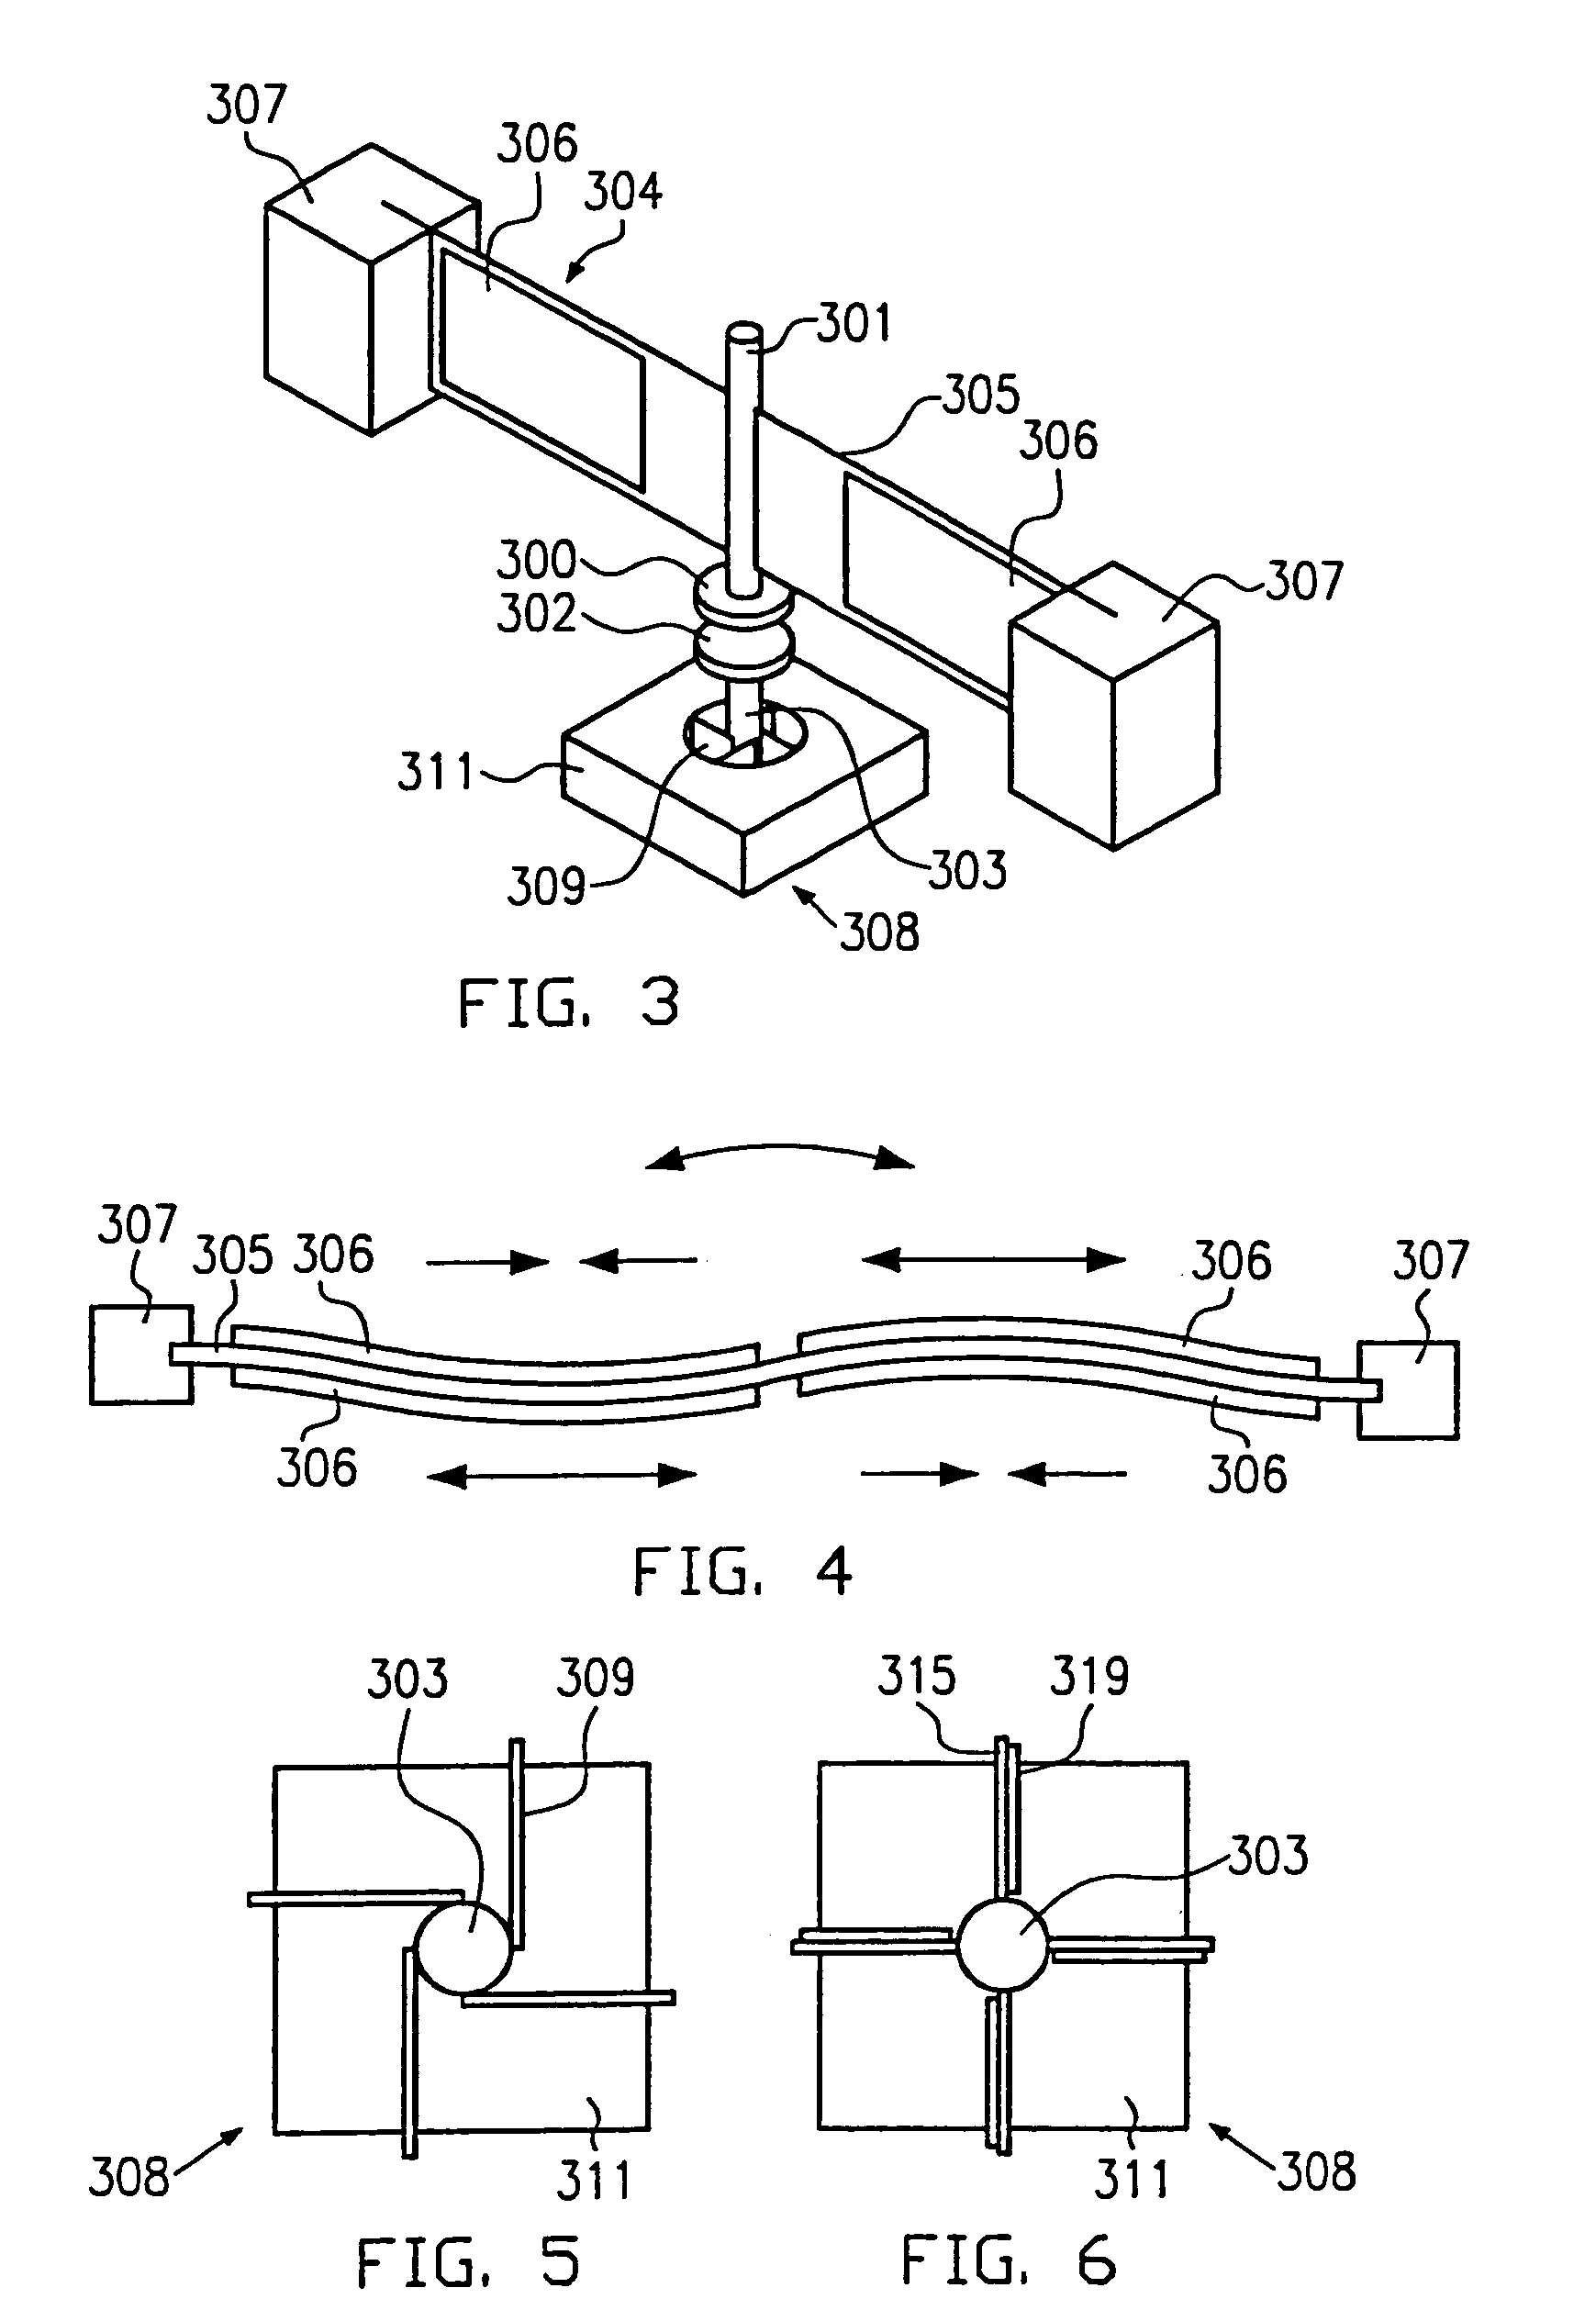 Tether plate sensor for measuring physical properties of fluid samples